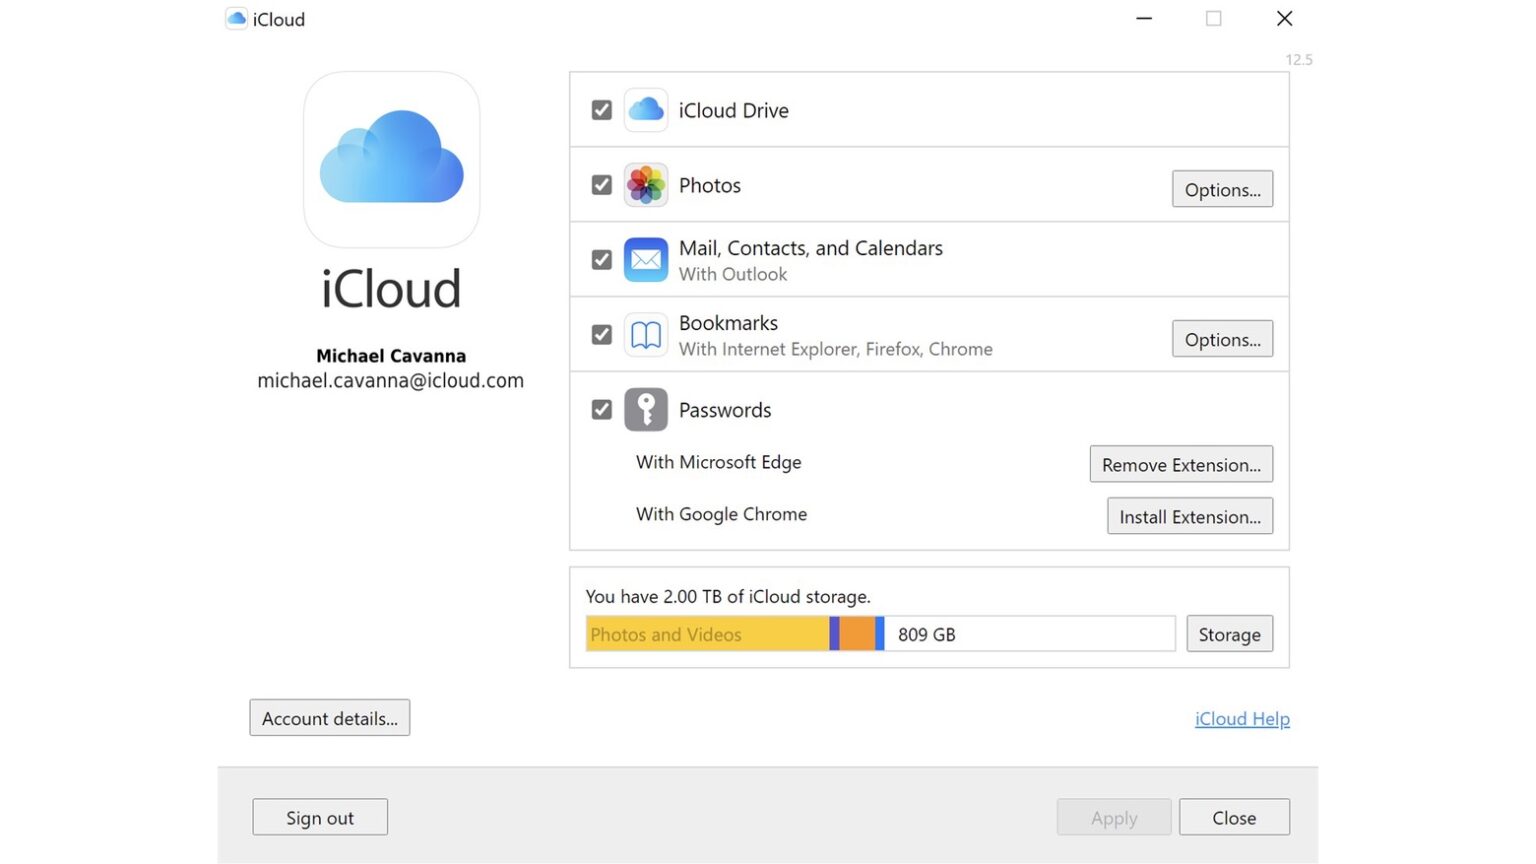 iCloud for Windows now supports ProRes videos and ProRaw photos